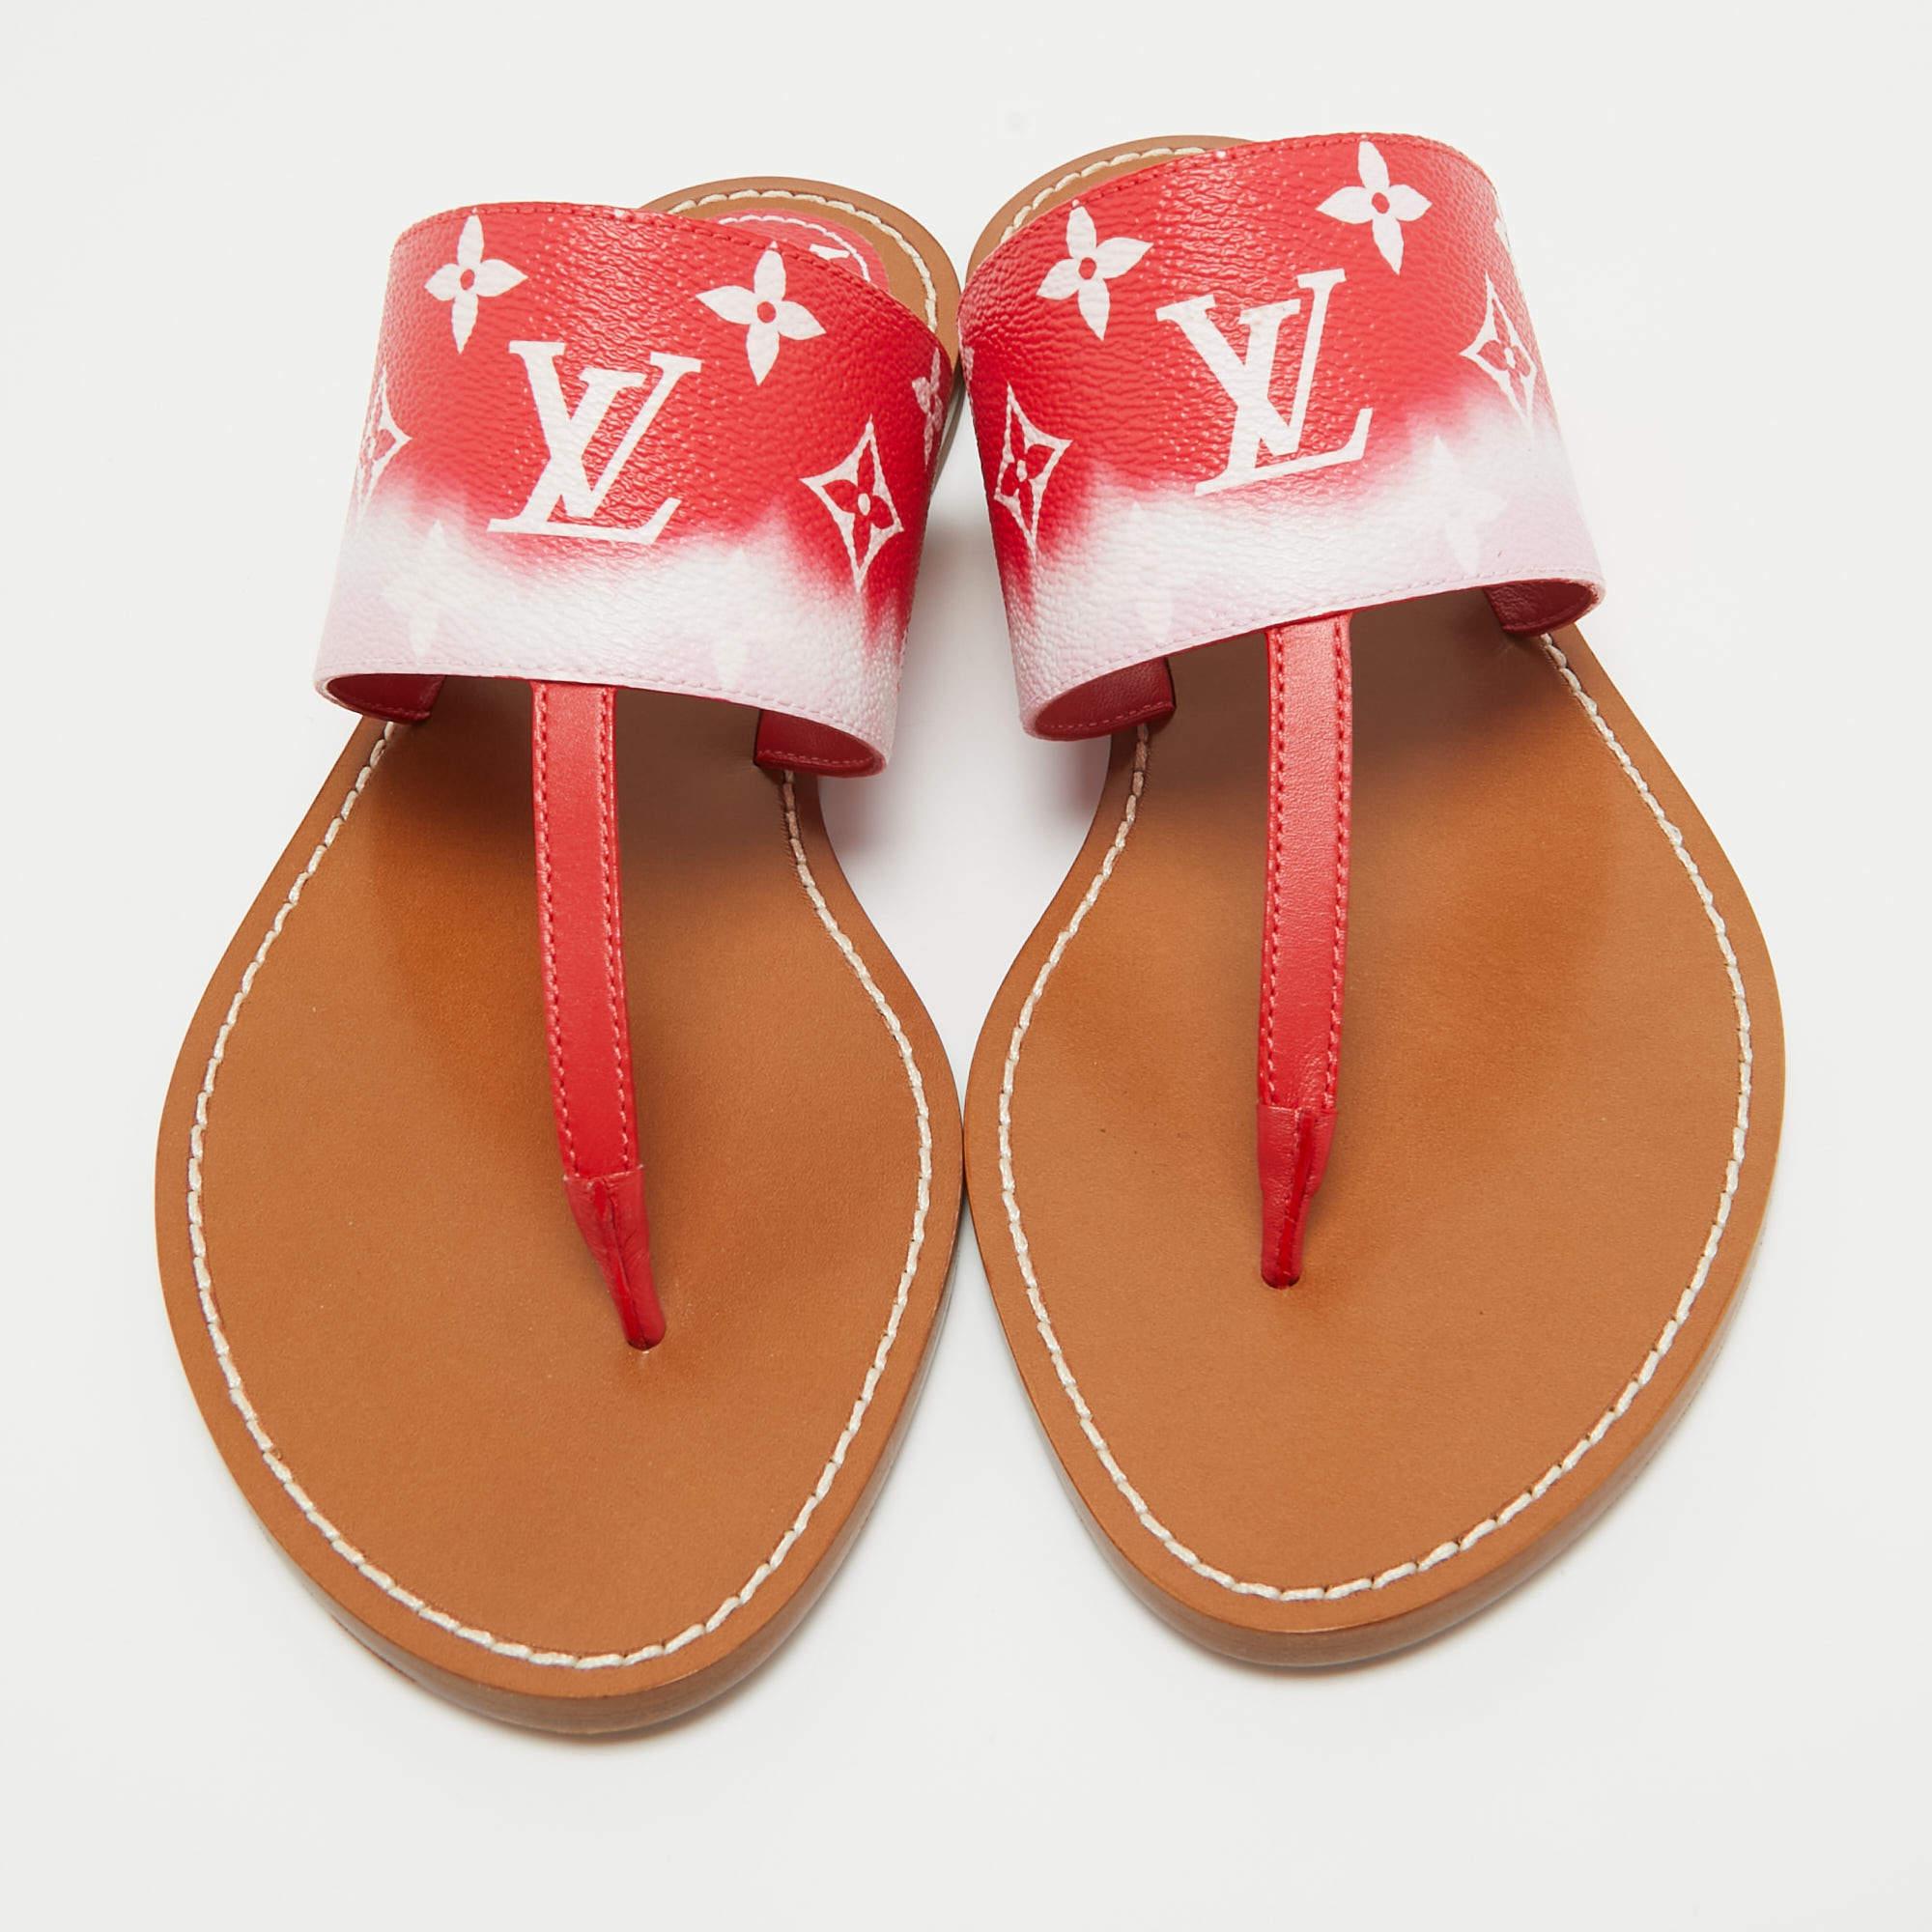 Frame your feet with these Louis Vuitton flat sandals. Created using the best materials, the flats are perfect with short, midi, and maxi hemlines.

Includes: Original Box

